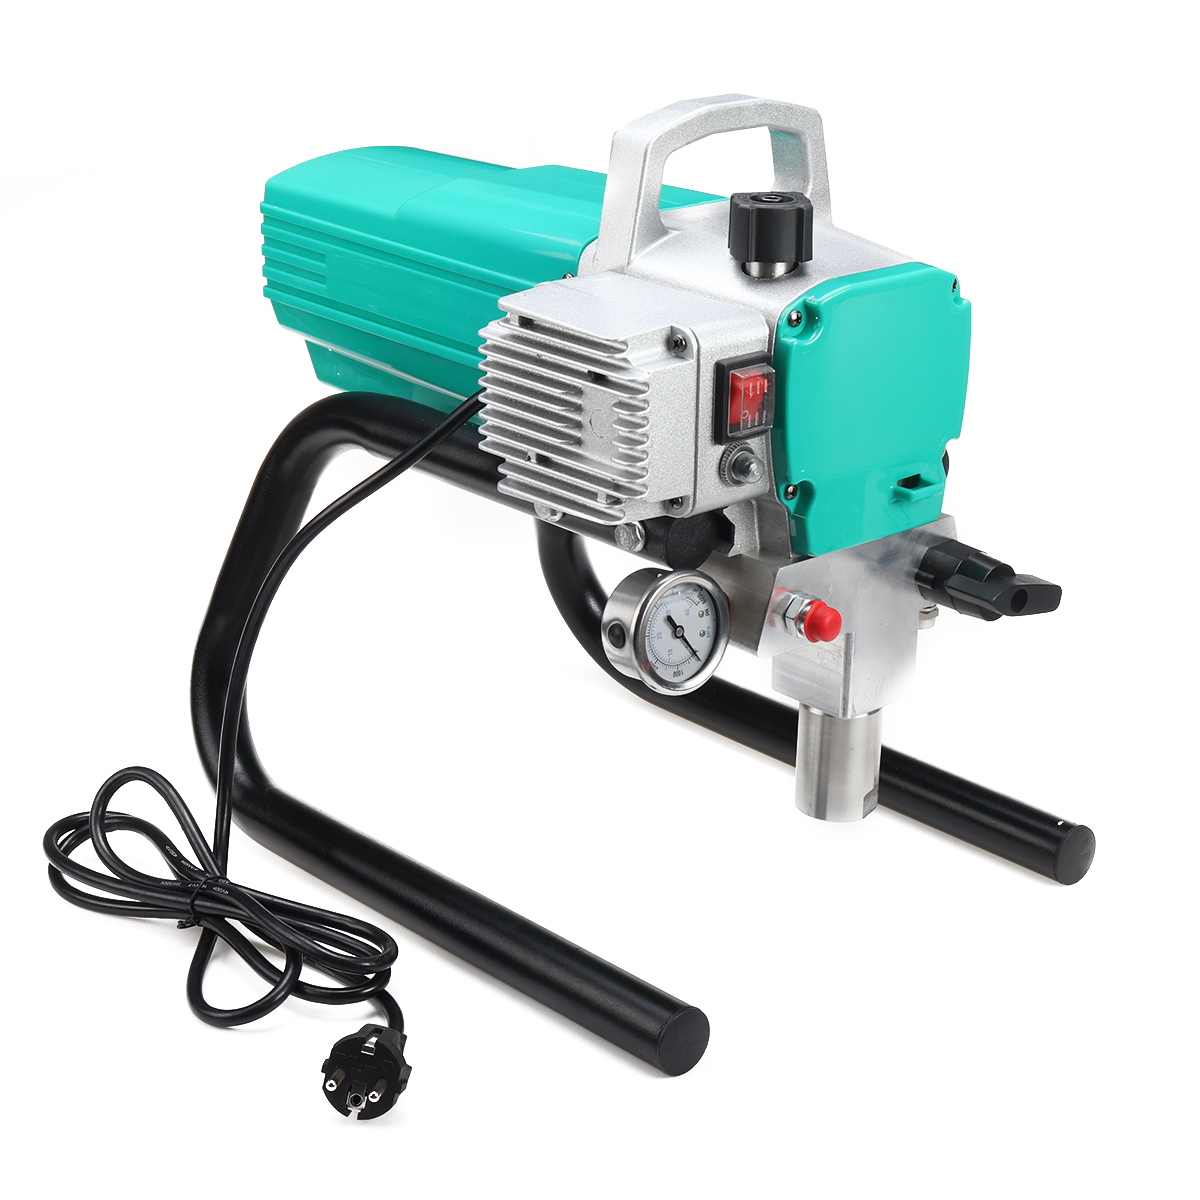 Find Drillrpo Professional Airless Spraying Machine Airless Spray Gun 2 8L Brushless Motor Airless Paint Sprayer Painting Machine for Sale on Gipsybee.com with cryptocurrencies